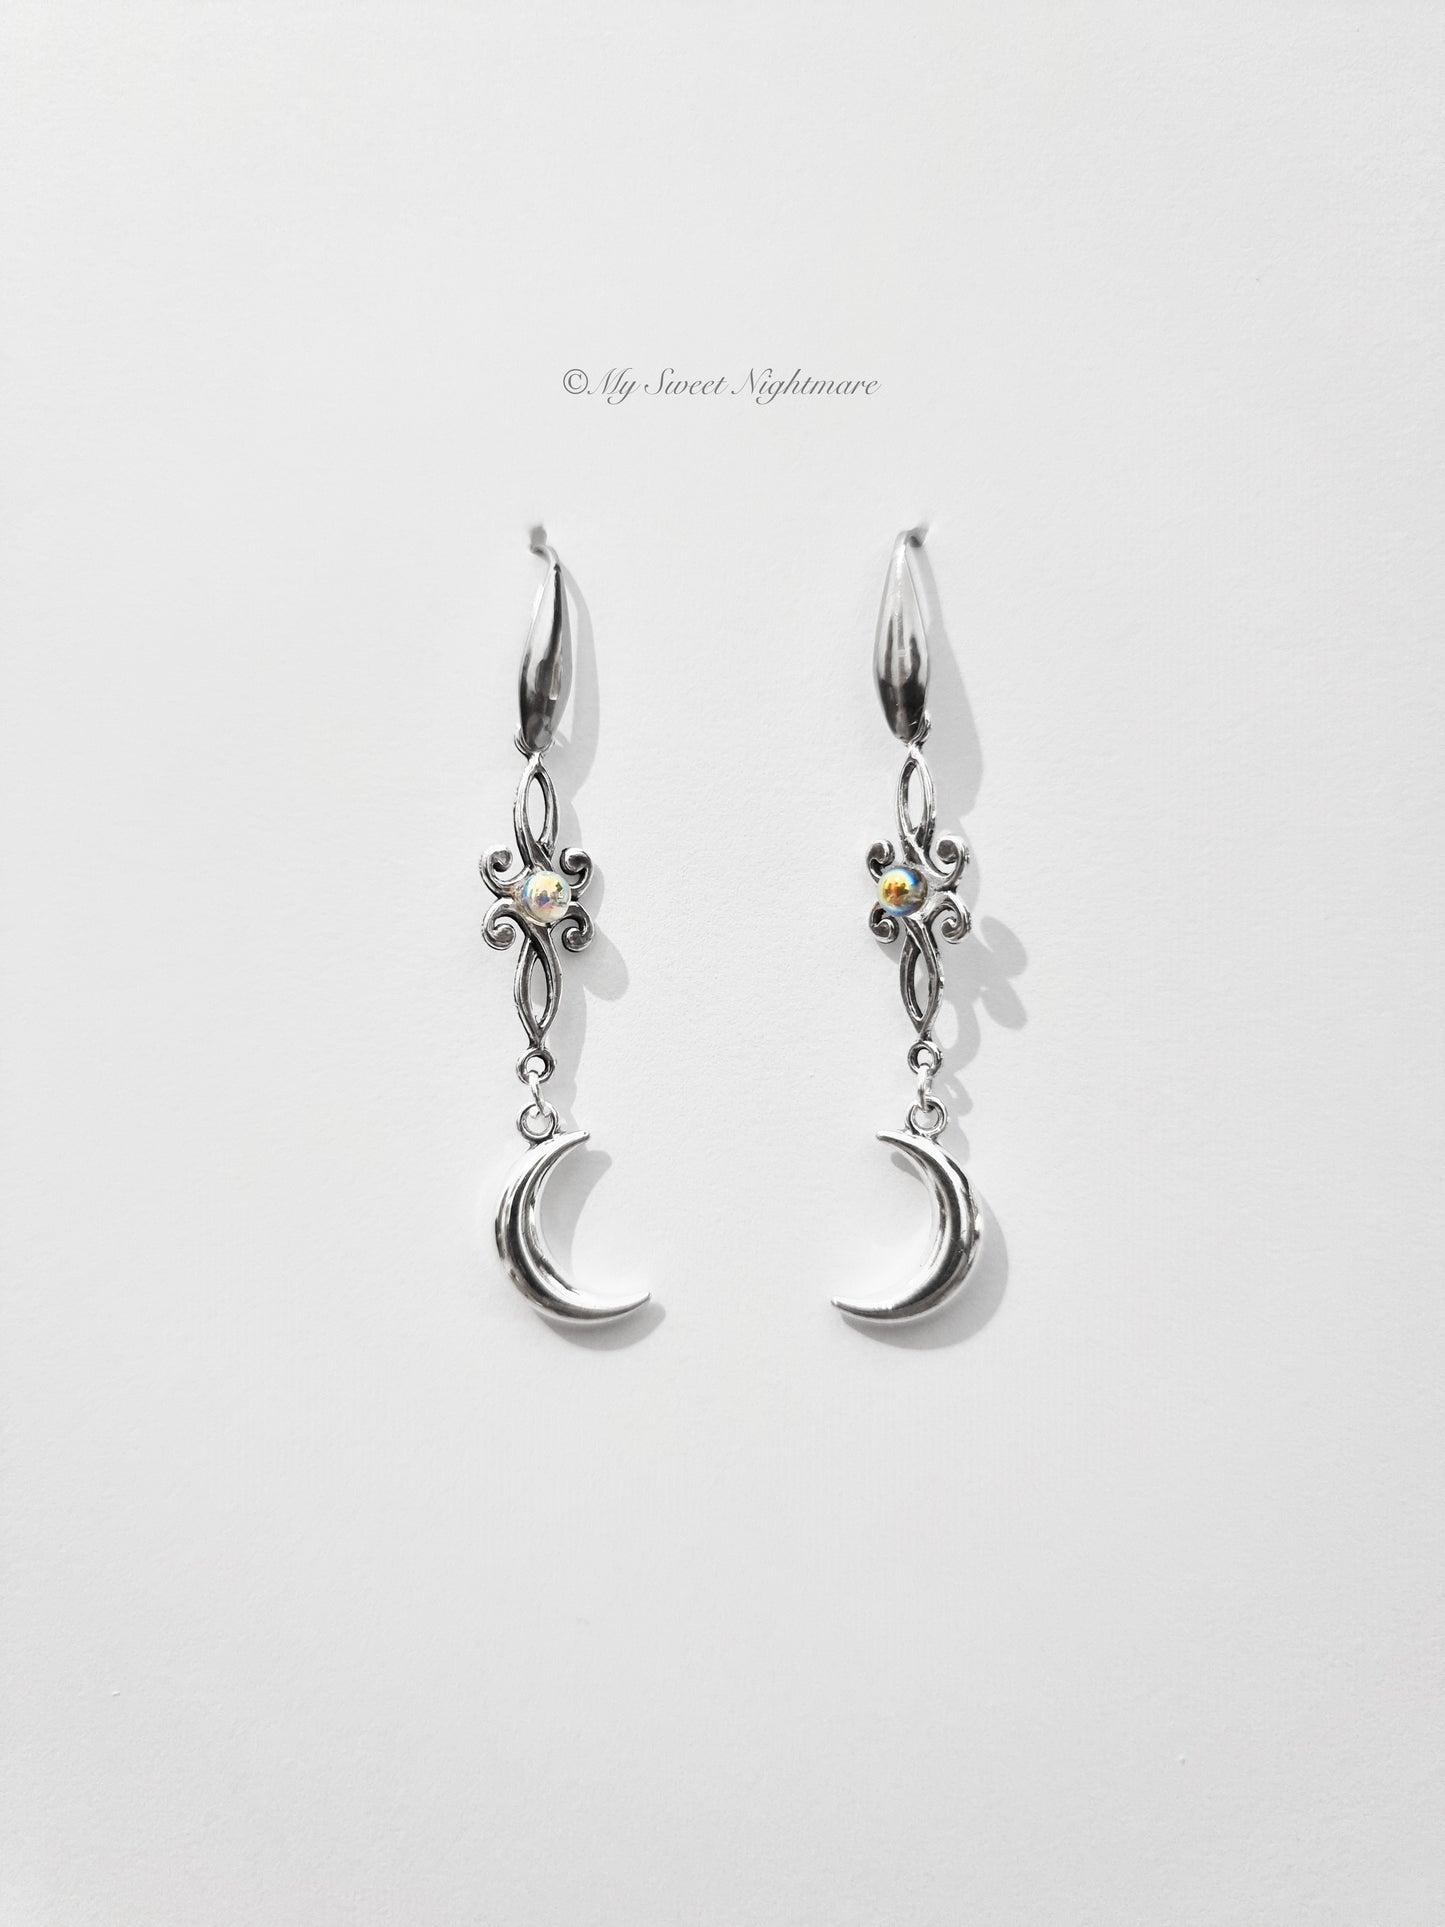 Celtic earrings with moons